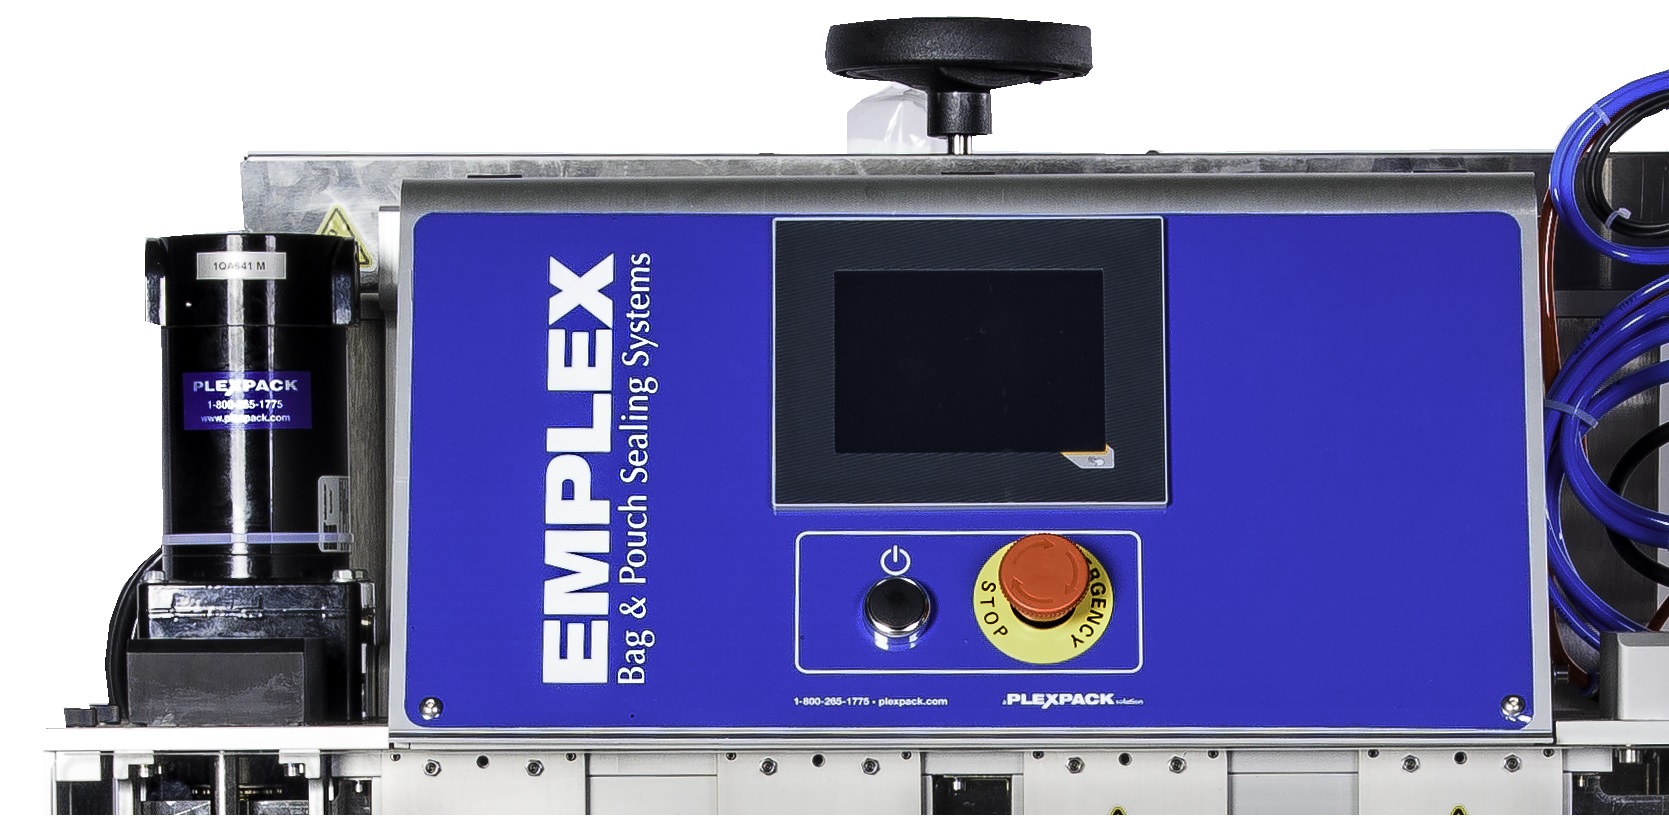 A Close-Up of the PLC interface used on Plexpack's Emplex Bag Sealers